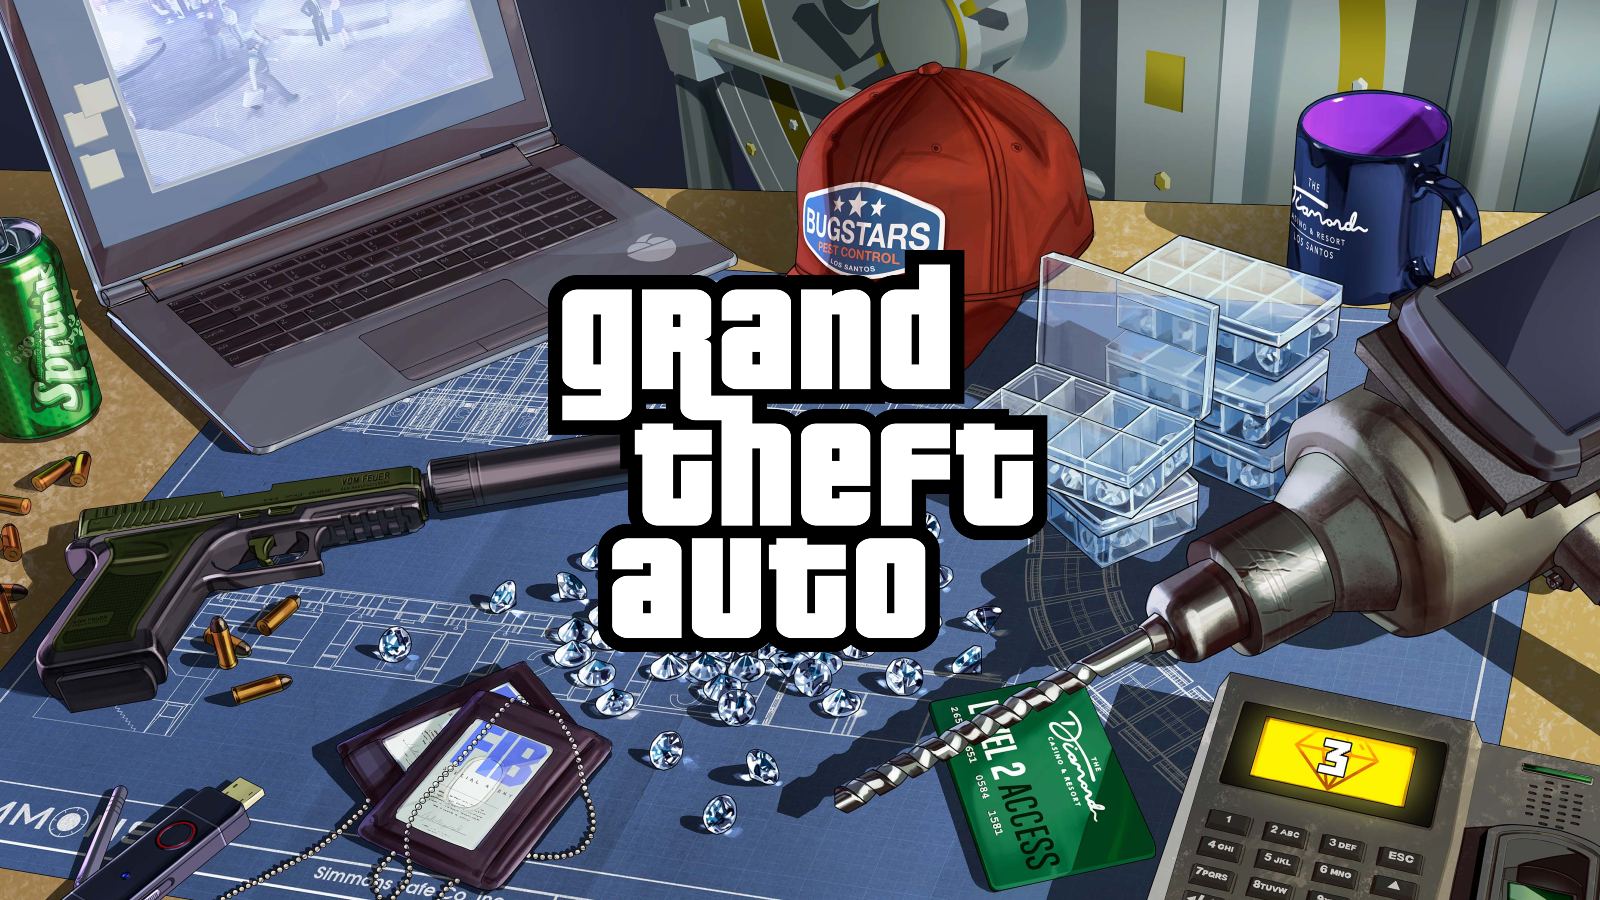 GTA 5 source code reportedly leaked online a year after RockStar hack